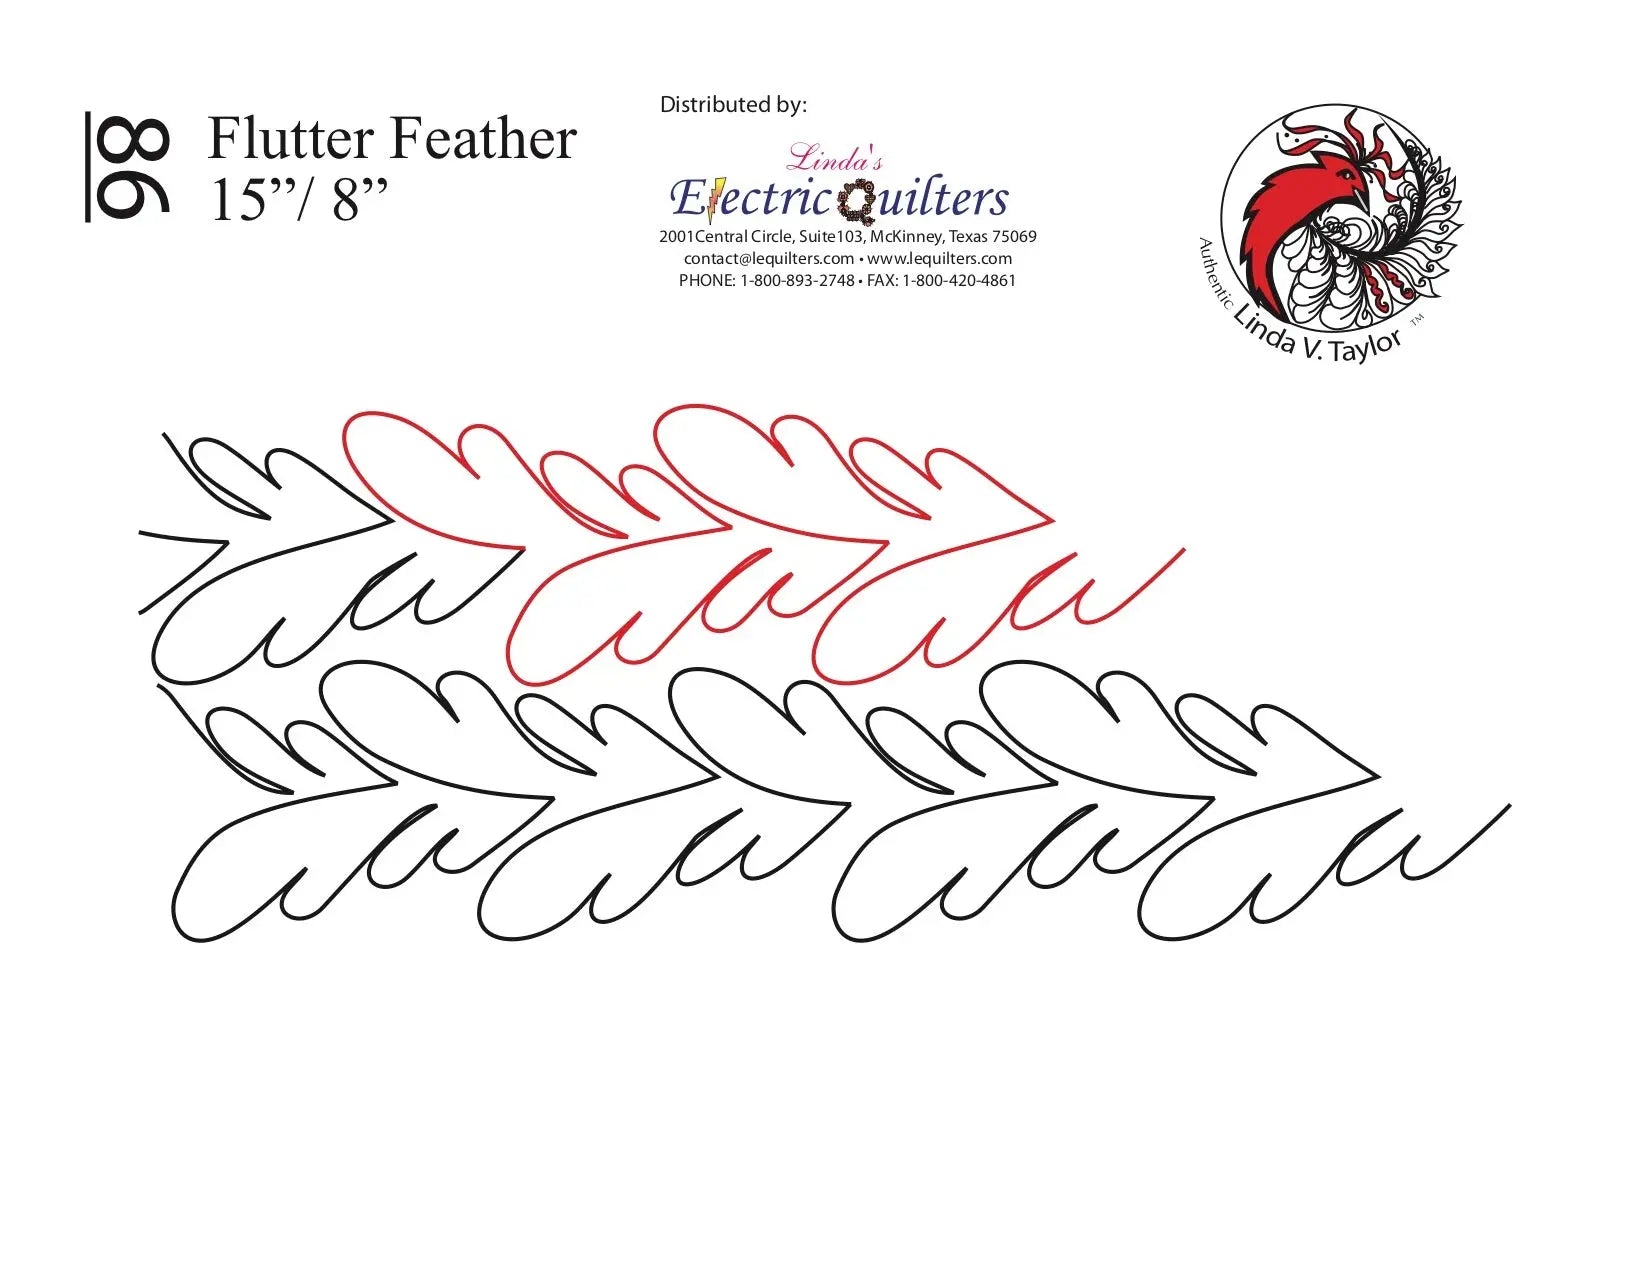 086 Flutter Feather Pantograph by Linda V. Taylor - Linda's Electric Quilters